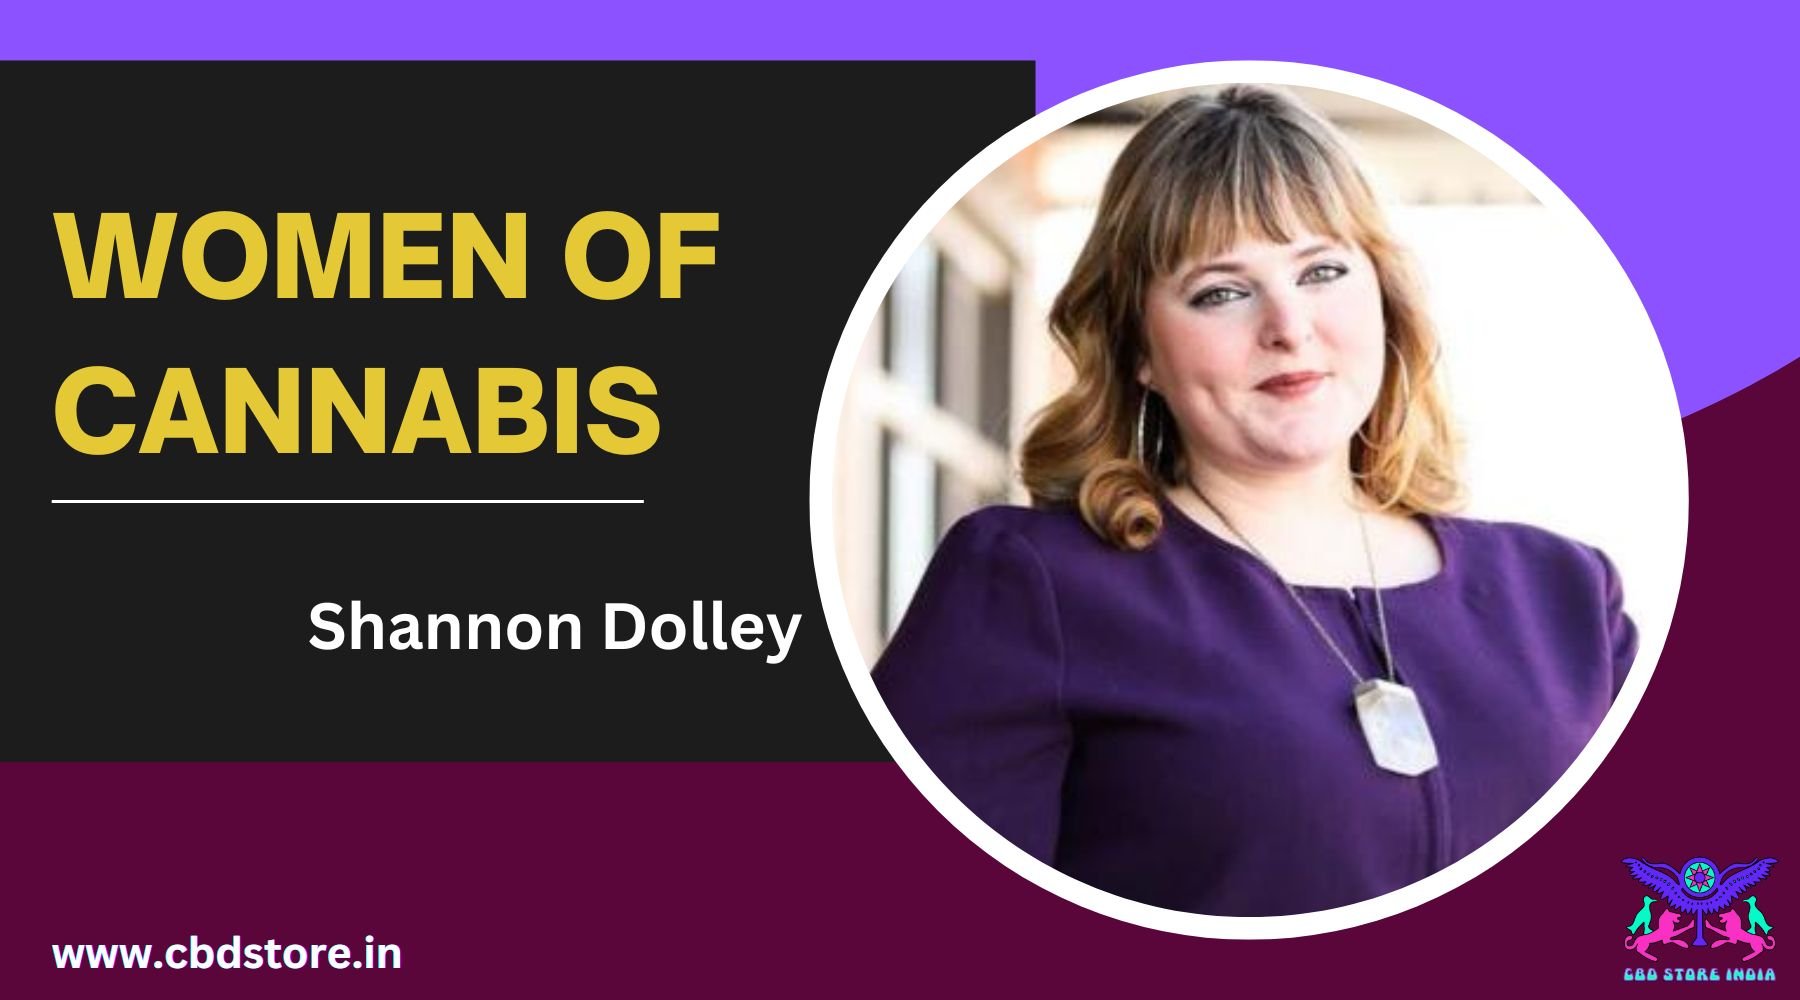 Women of Cannabis: Shannon Dolley has a message of gold for budding entrepreneurs - CBD Store India